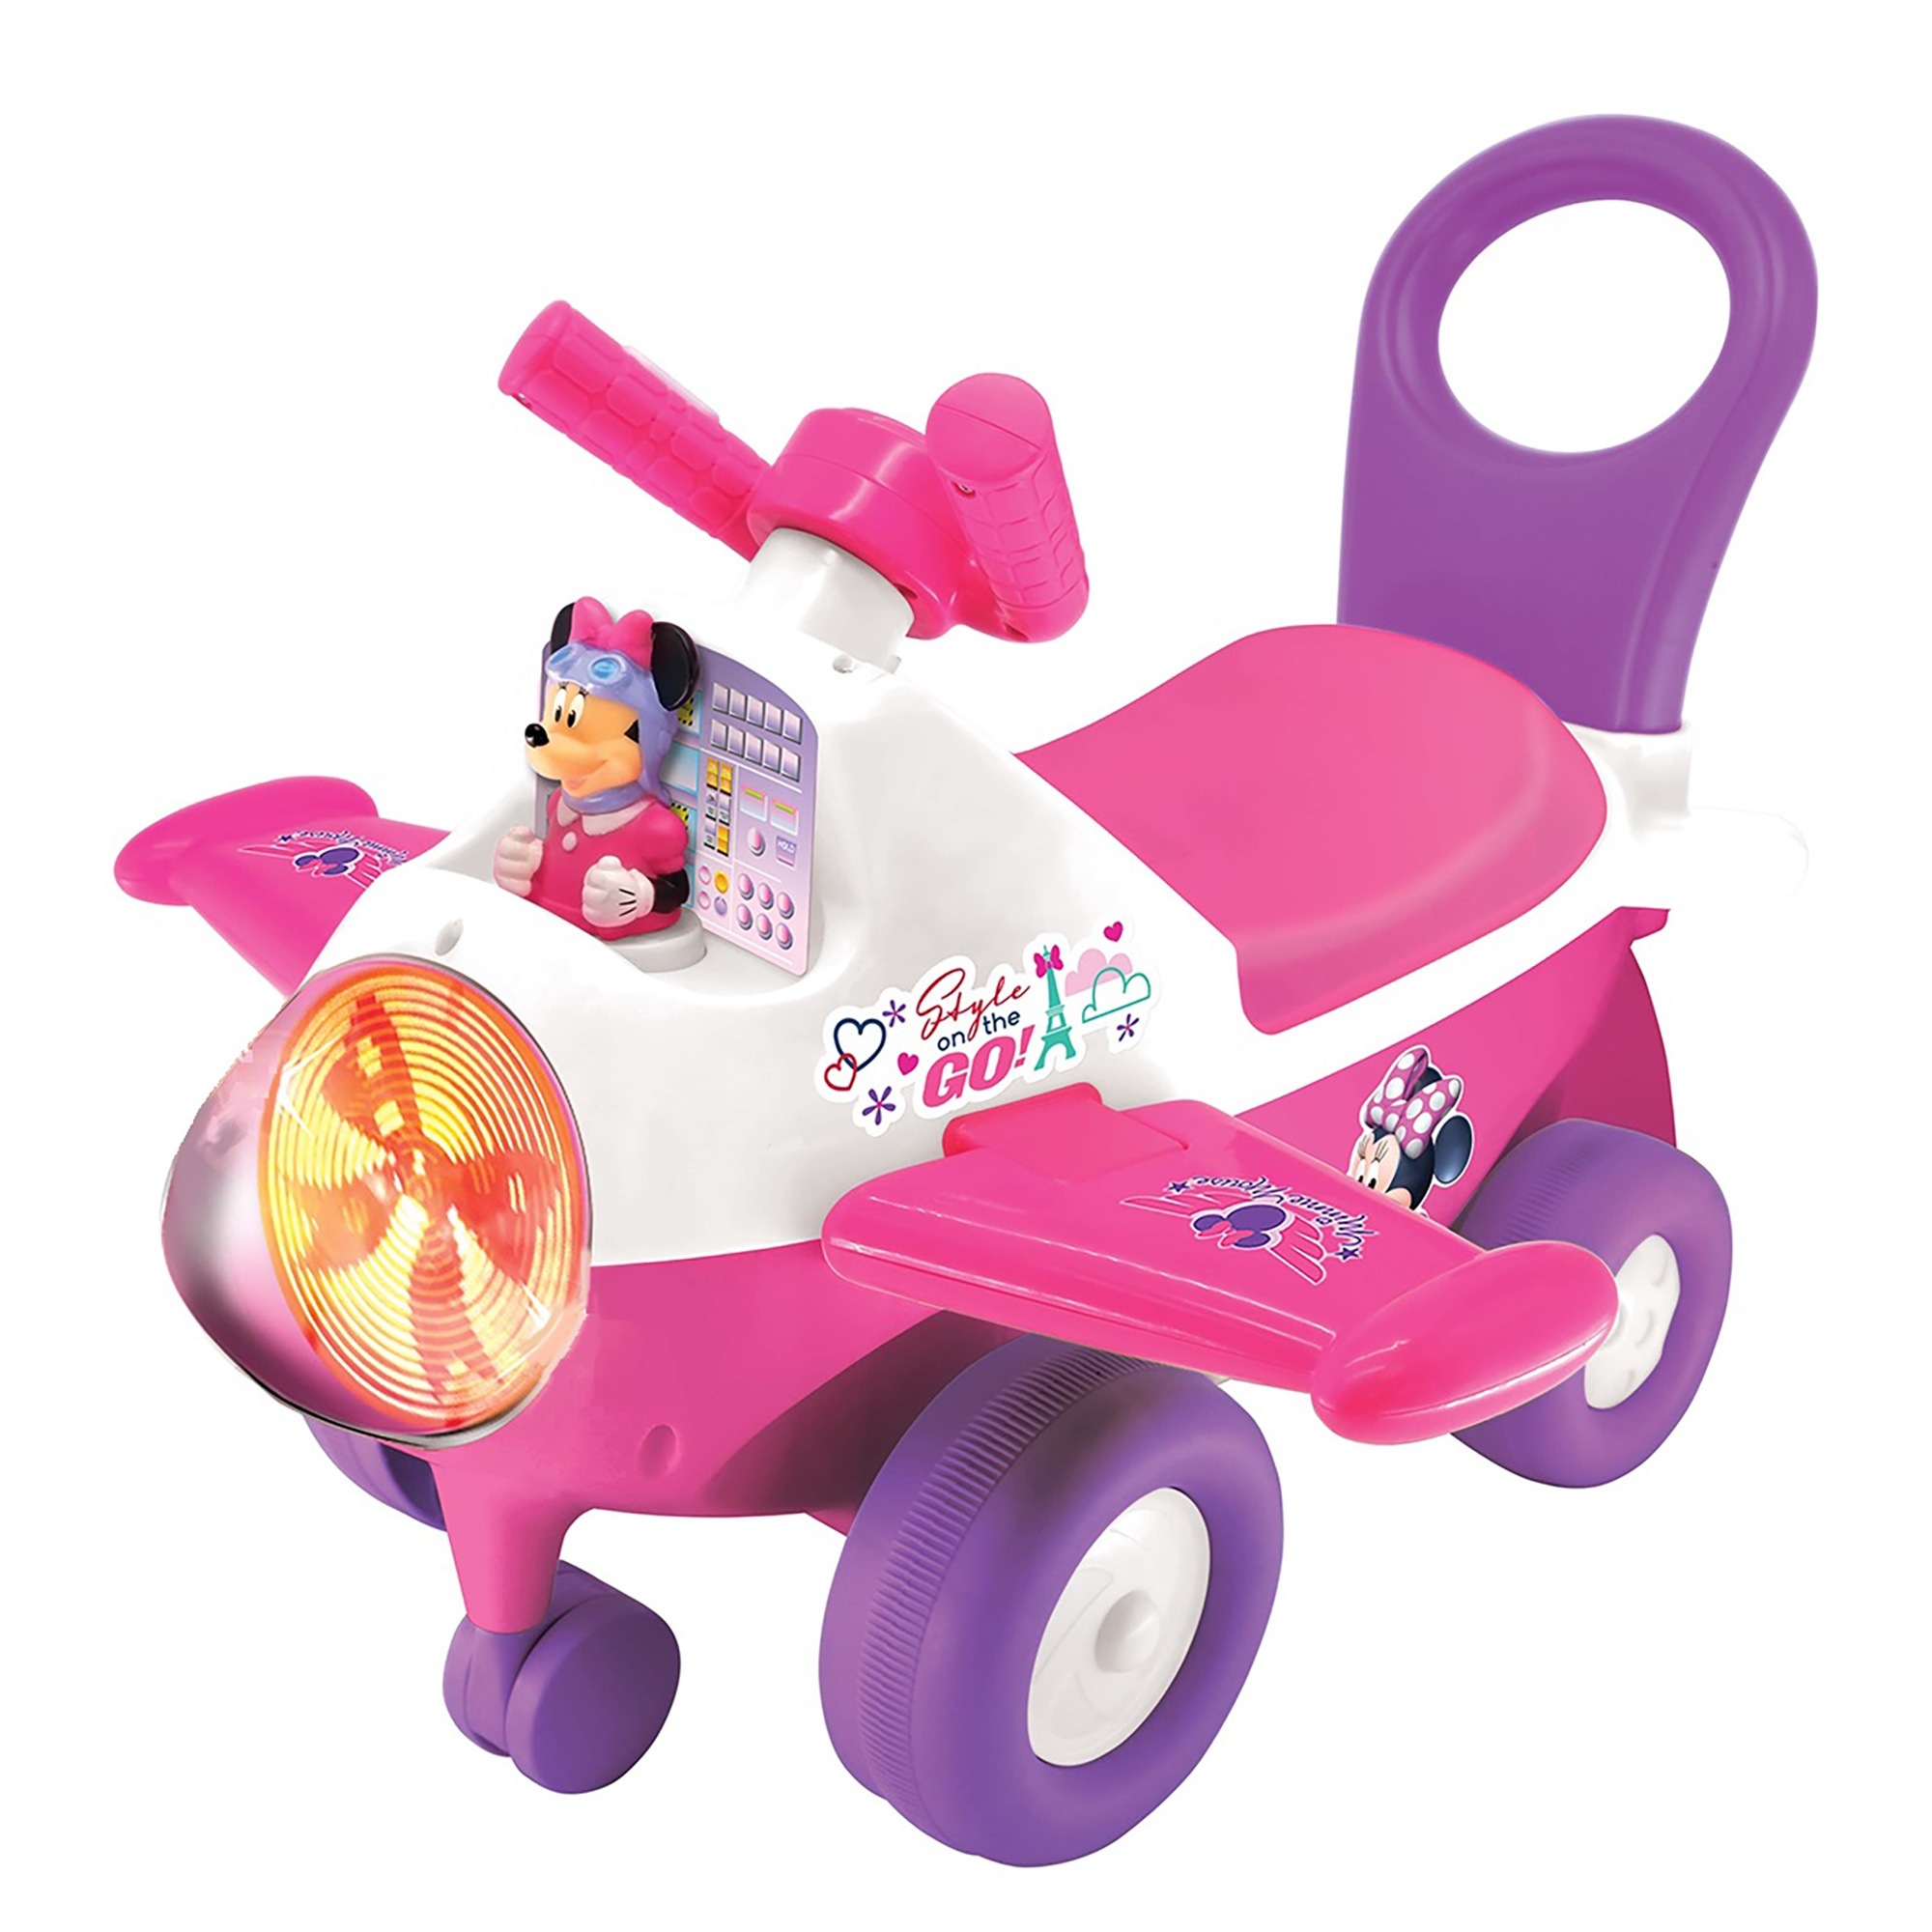 Kiddieland Disney Animated Lights: Minnie Mouse Activity Plane Kids Interactive Push Toy Car, Foot To Floor, Toddlers, Ages 12-36 Months - image 1 of 5